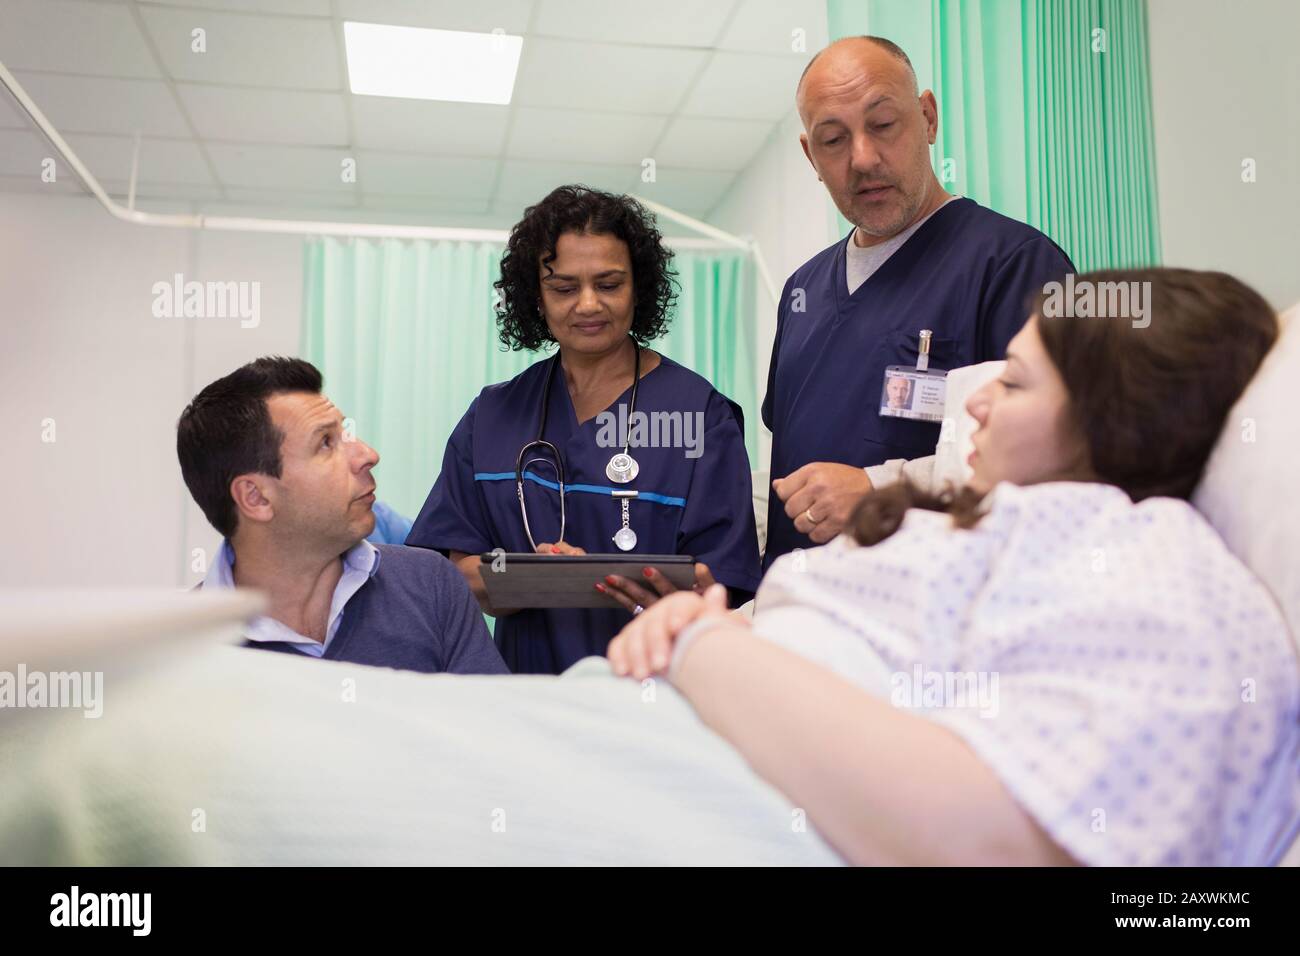 Doctors making rounds, talking with couple in hospital room Stock Photo